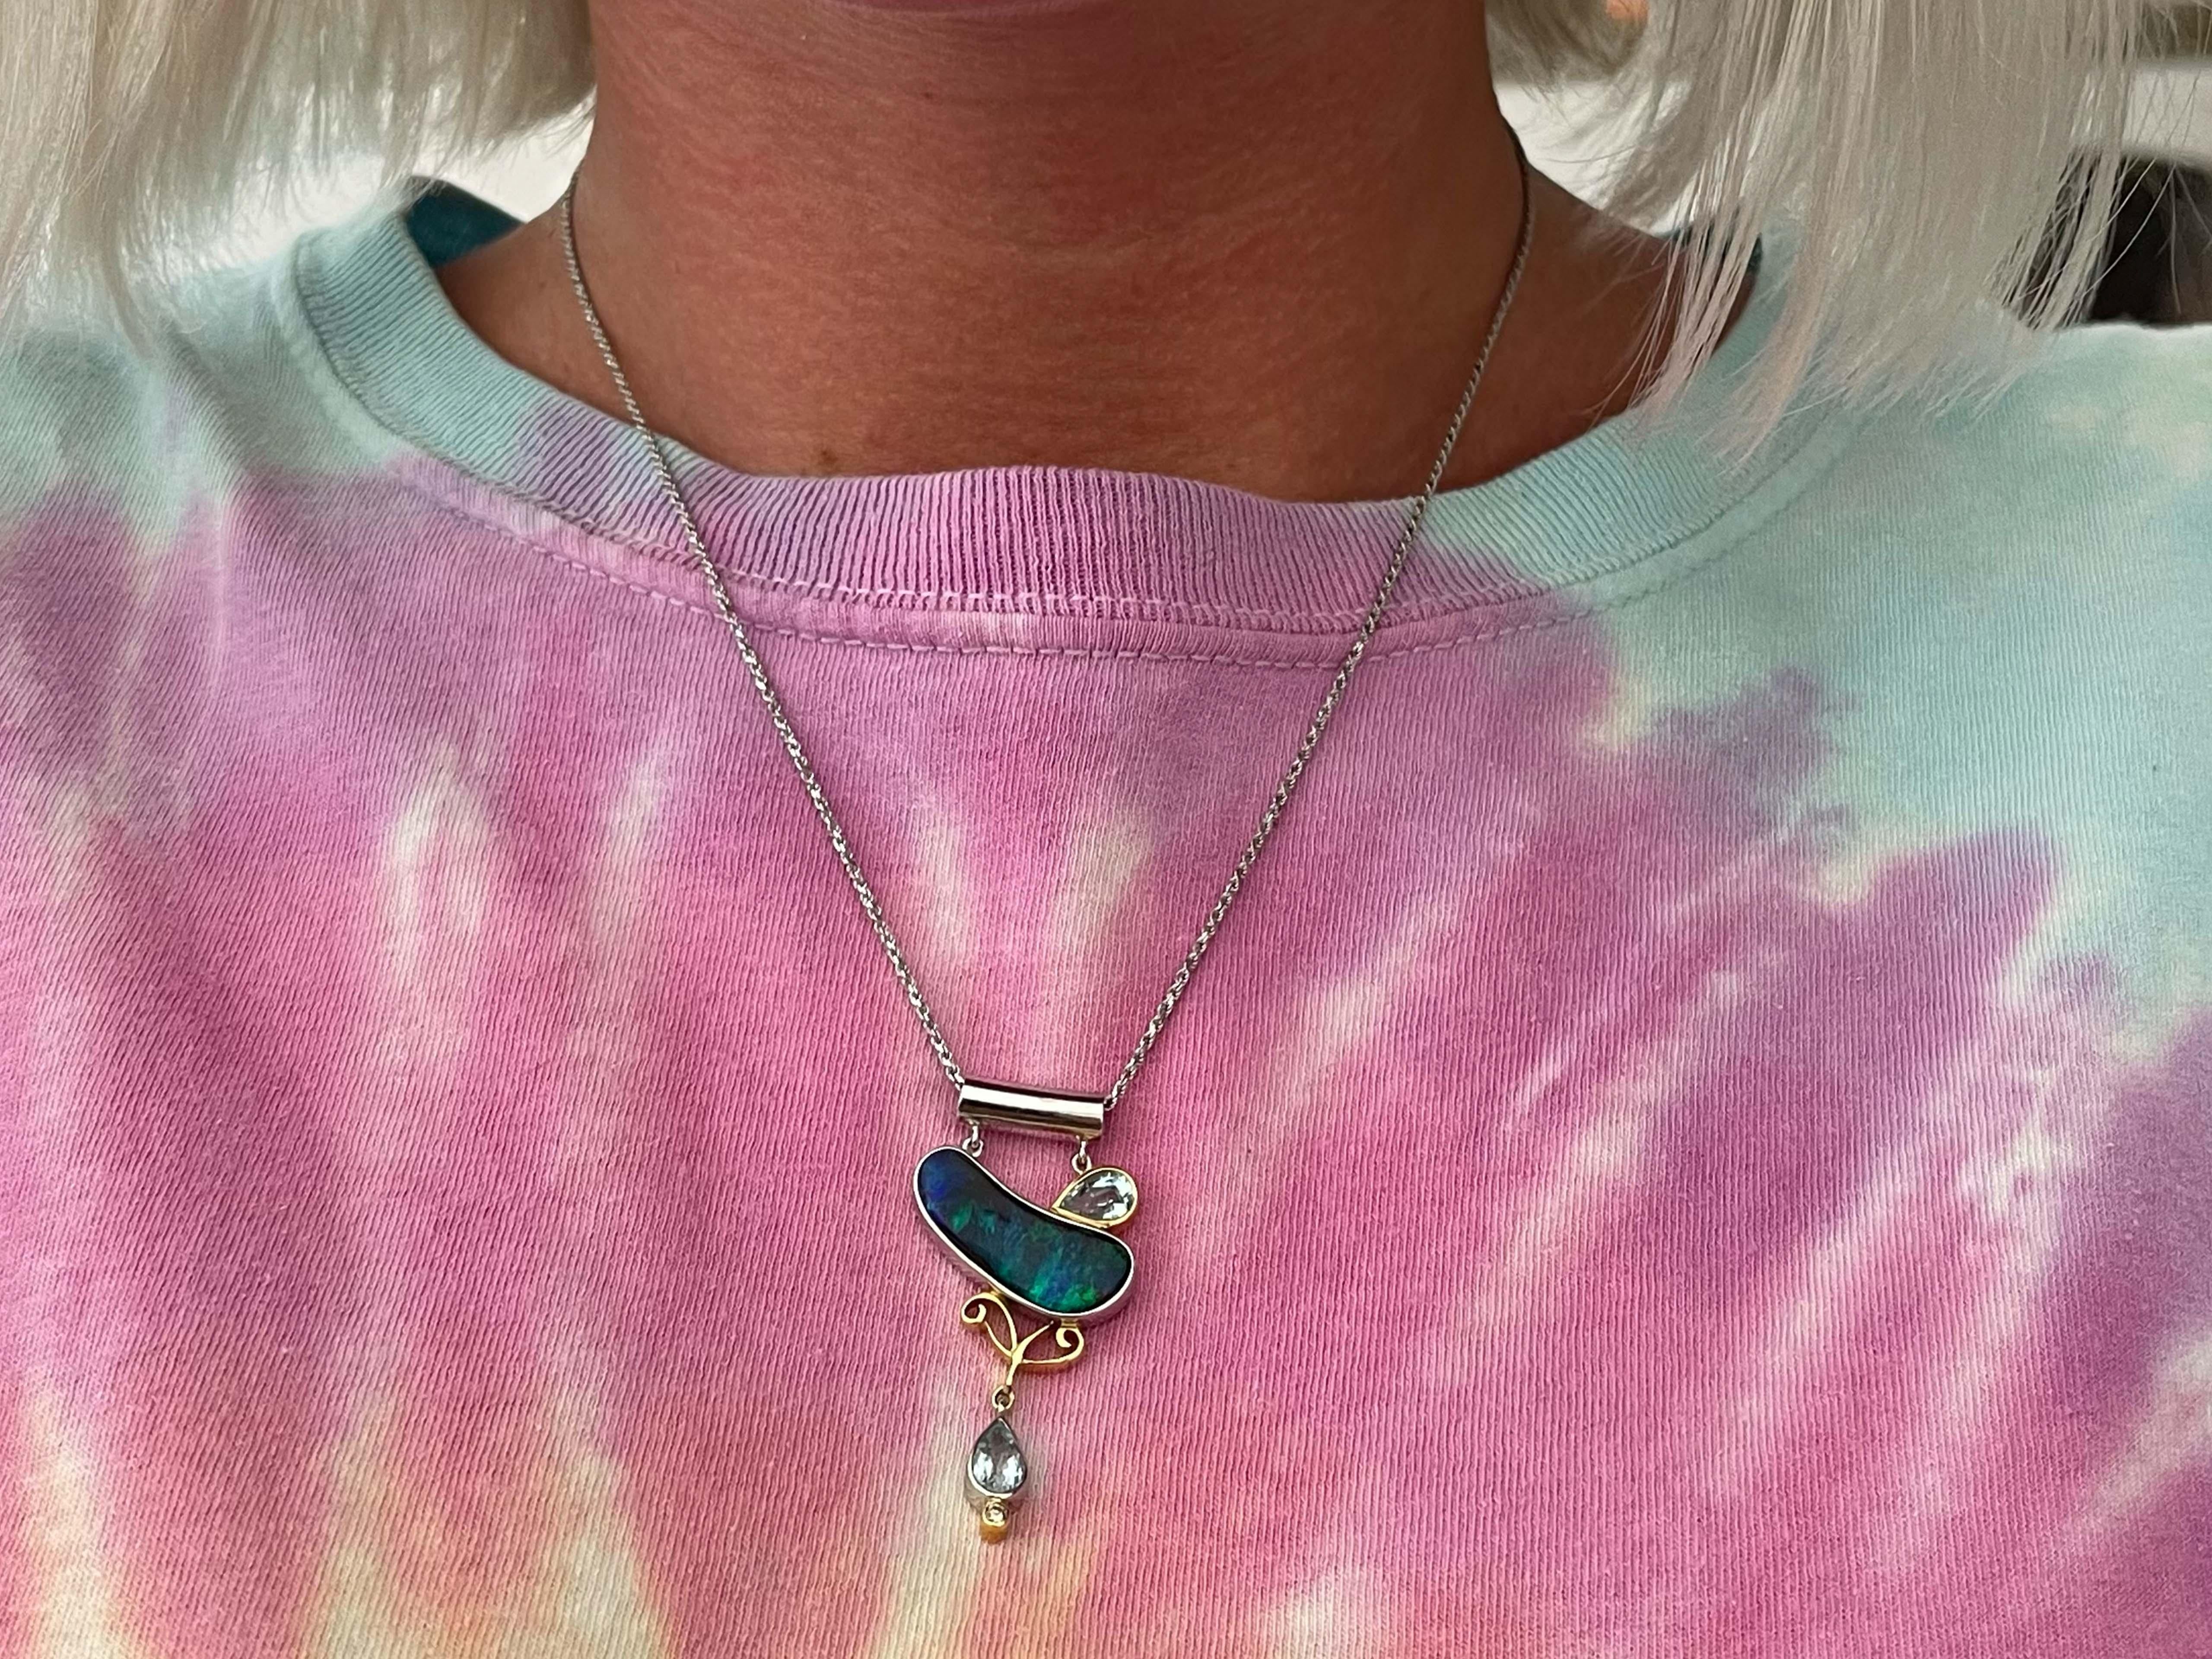 This unique piece of jewelry is one-of-a-kind. At its center is a stunning blue green opal, resembling the Northern lights of Alaska, a truly rare phenomenon, this opal is much the same in its rare stunning color play of deep blue and electric green